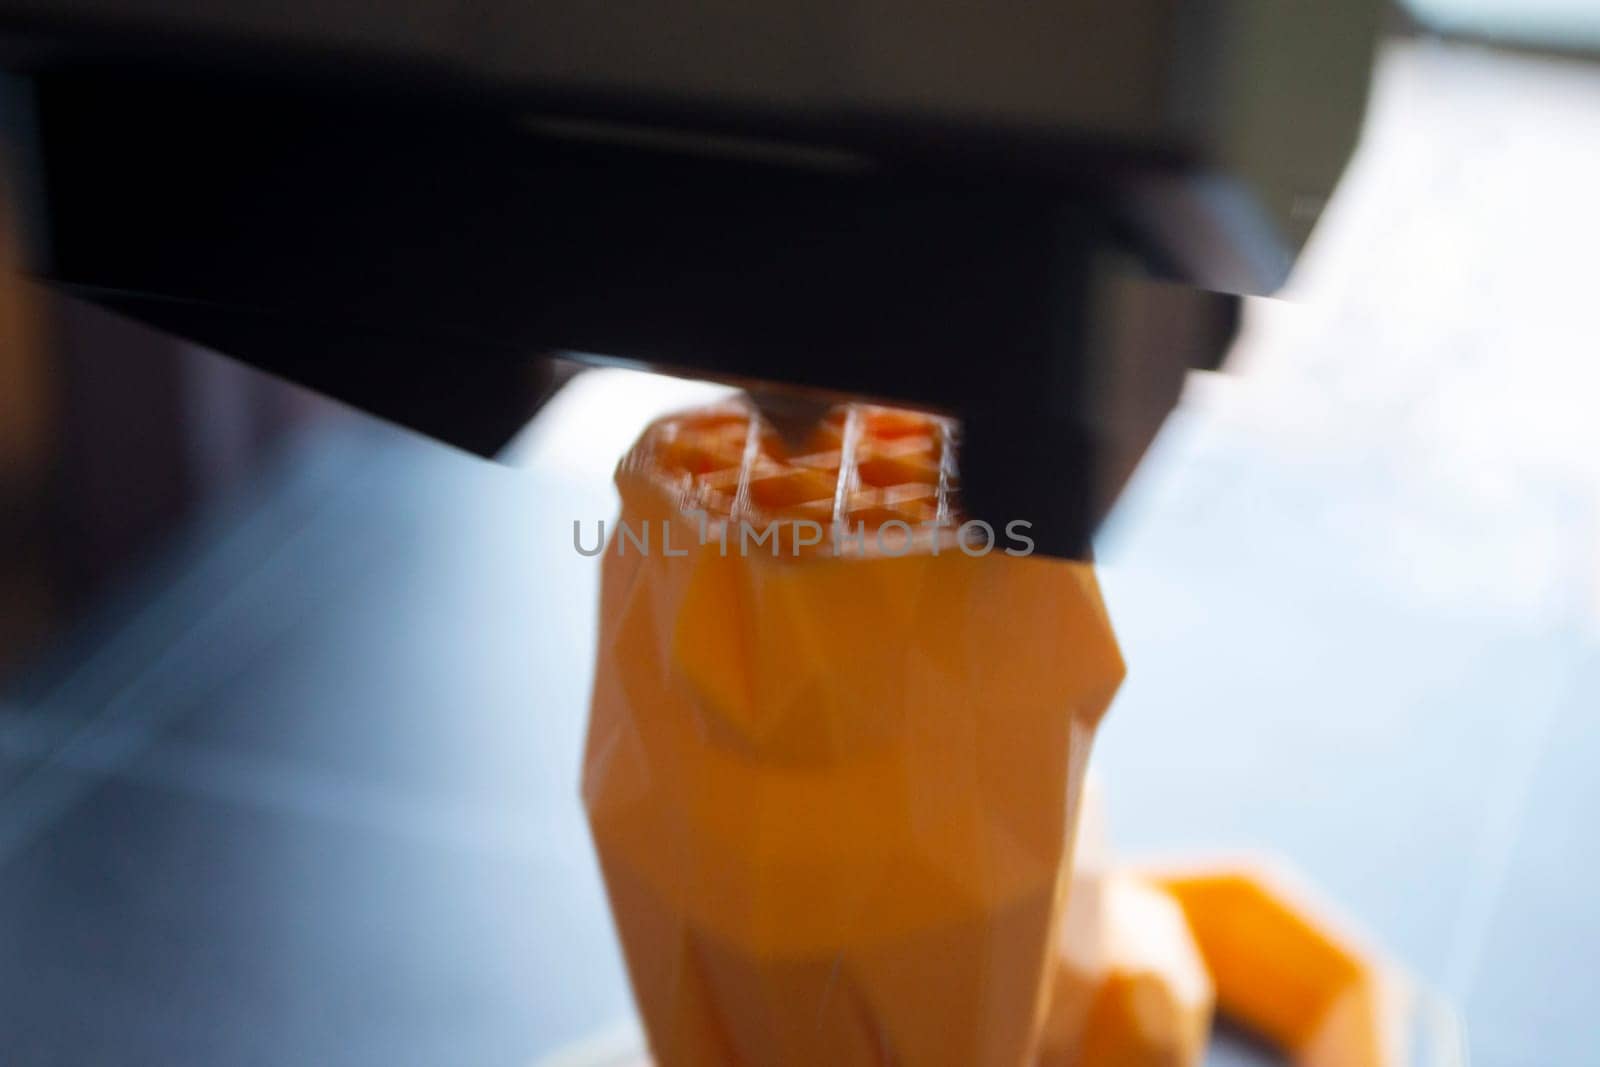 3D printer close-up. The process of working of 3D printer. 3D printer printing object from molten plastic. 3D printer creating model by flowing liquid plastic from an extruder. Printing technology